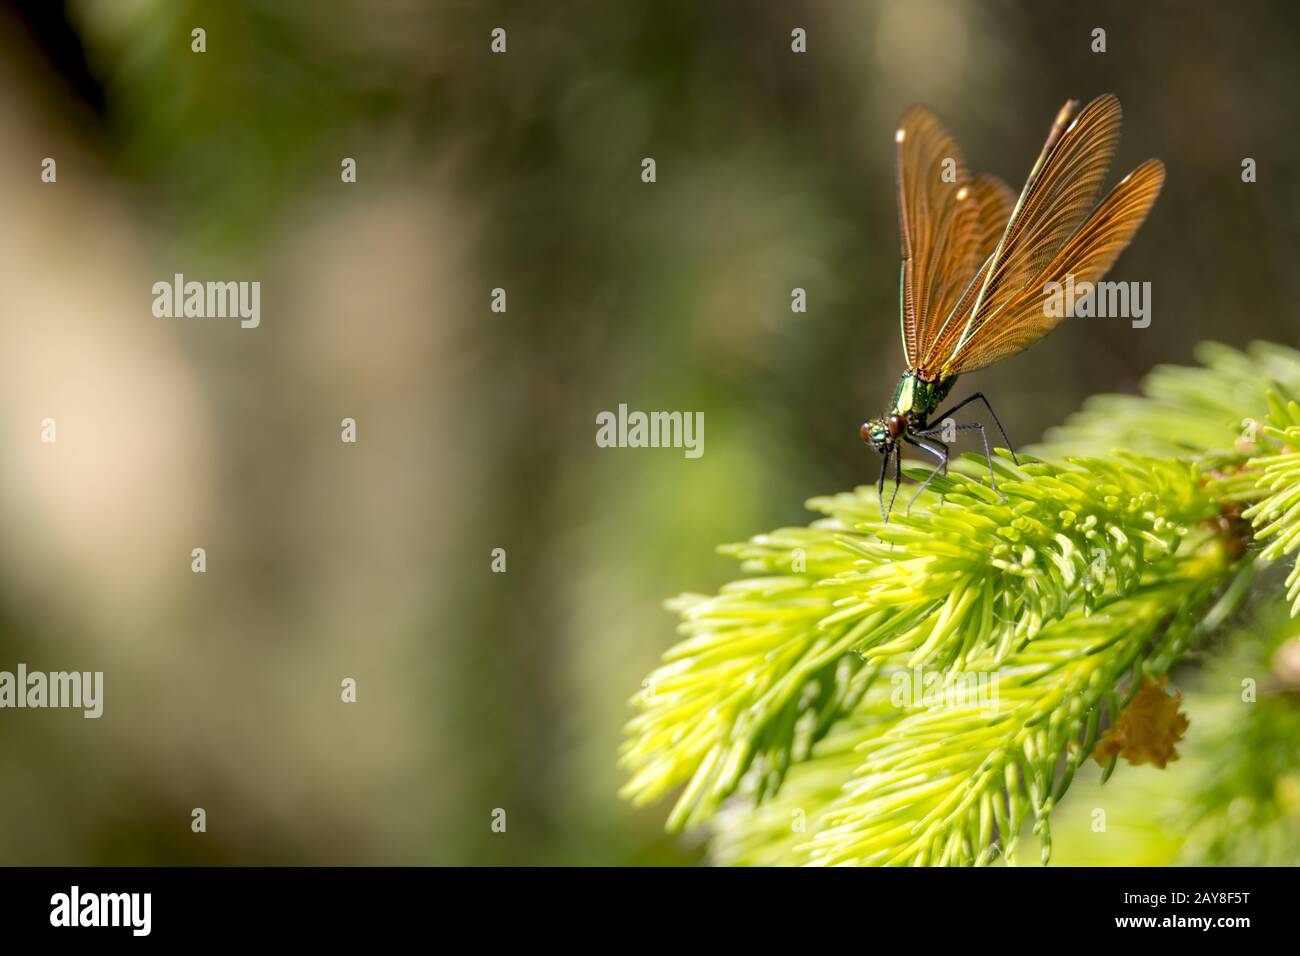 Bronze beautiful dragonfly sits on a fir branch against blurred brown background with copy space Stock Photo